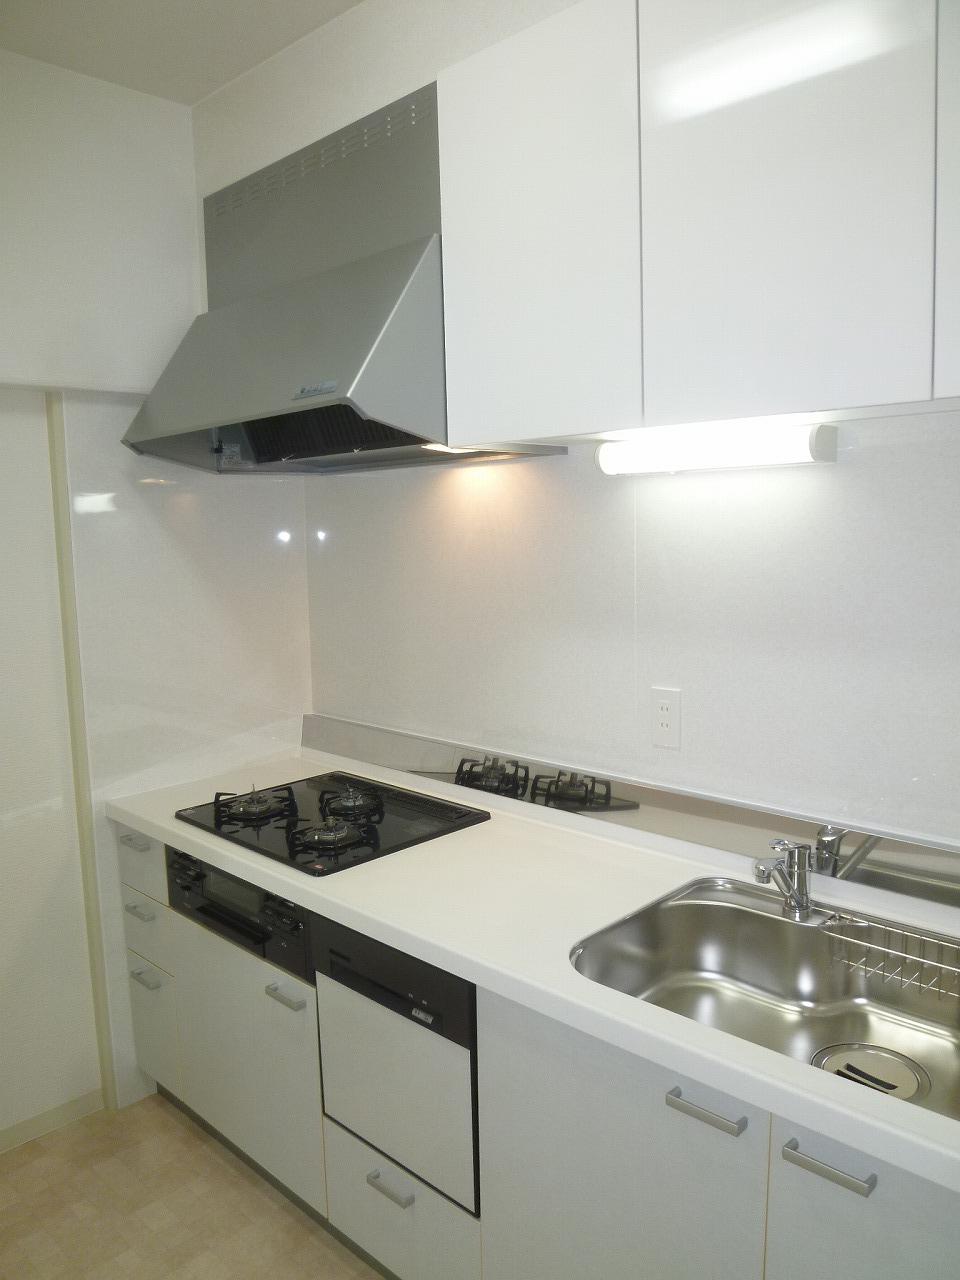 Kitchen.  ・ It comes with a dishwasher  ・ We had made stove trivet  ・ Range hood had made  ・ You have the floor CF re-covering